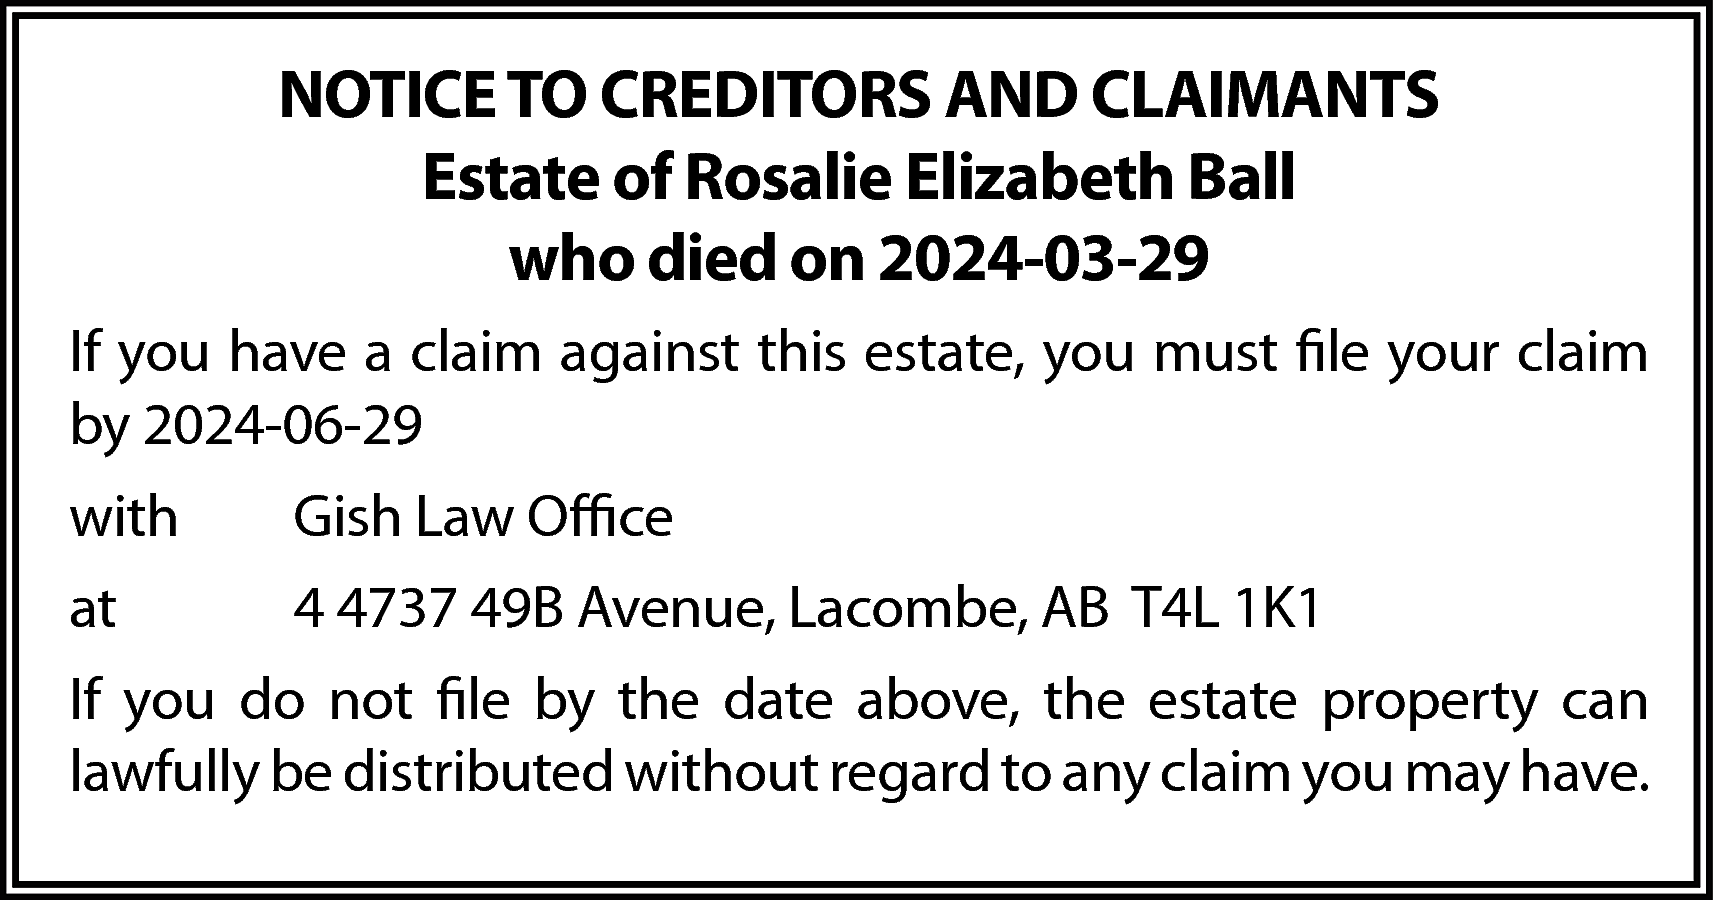 NOTICE TO CREDITORS AND CLAIMANTS  NOTICE TO CREDITORS AND CLAIMANTS  Estate of Rosalie Elizabeth Ball  who died on 2024-03-29  If you have a claim against this estate, you must file your claim  by 2024-06-29  with    Gish Law Office    at    4 4737 49B Avenue, Lacombe, AB T4L 1K1    If you do not file by the date above, the estate property can  lawfully be distributed without regard to any claim you may have.    